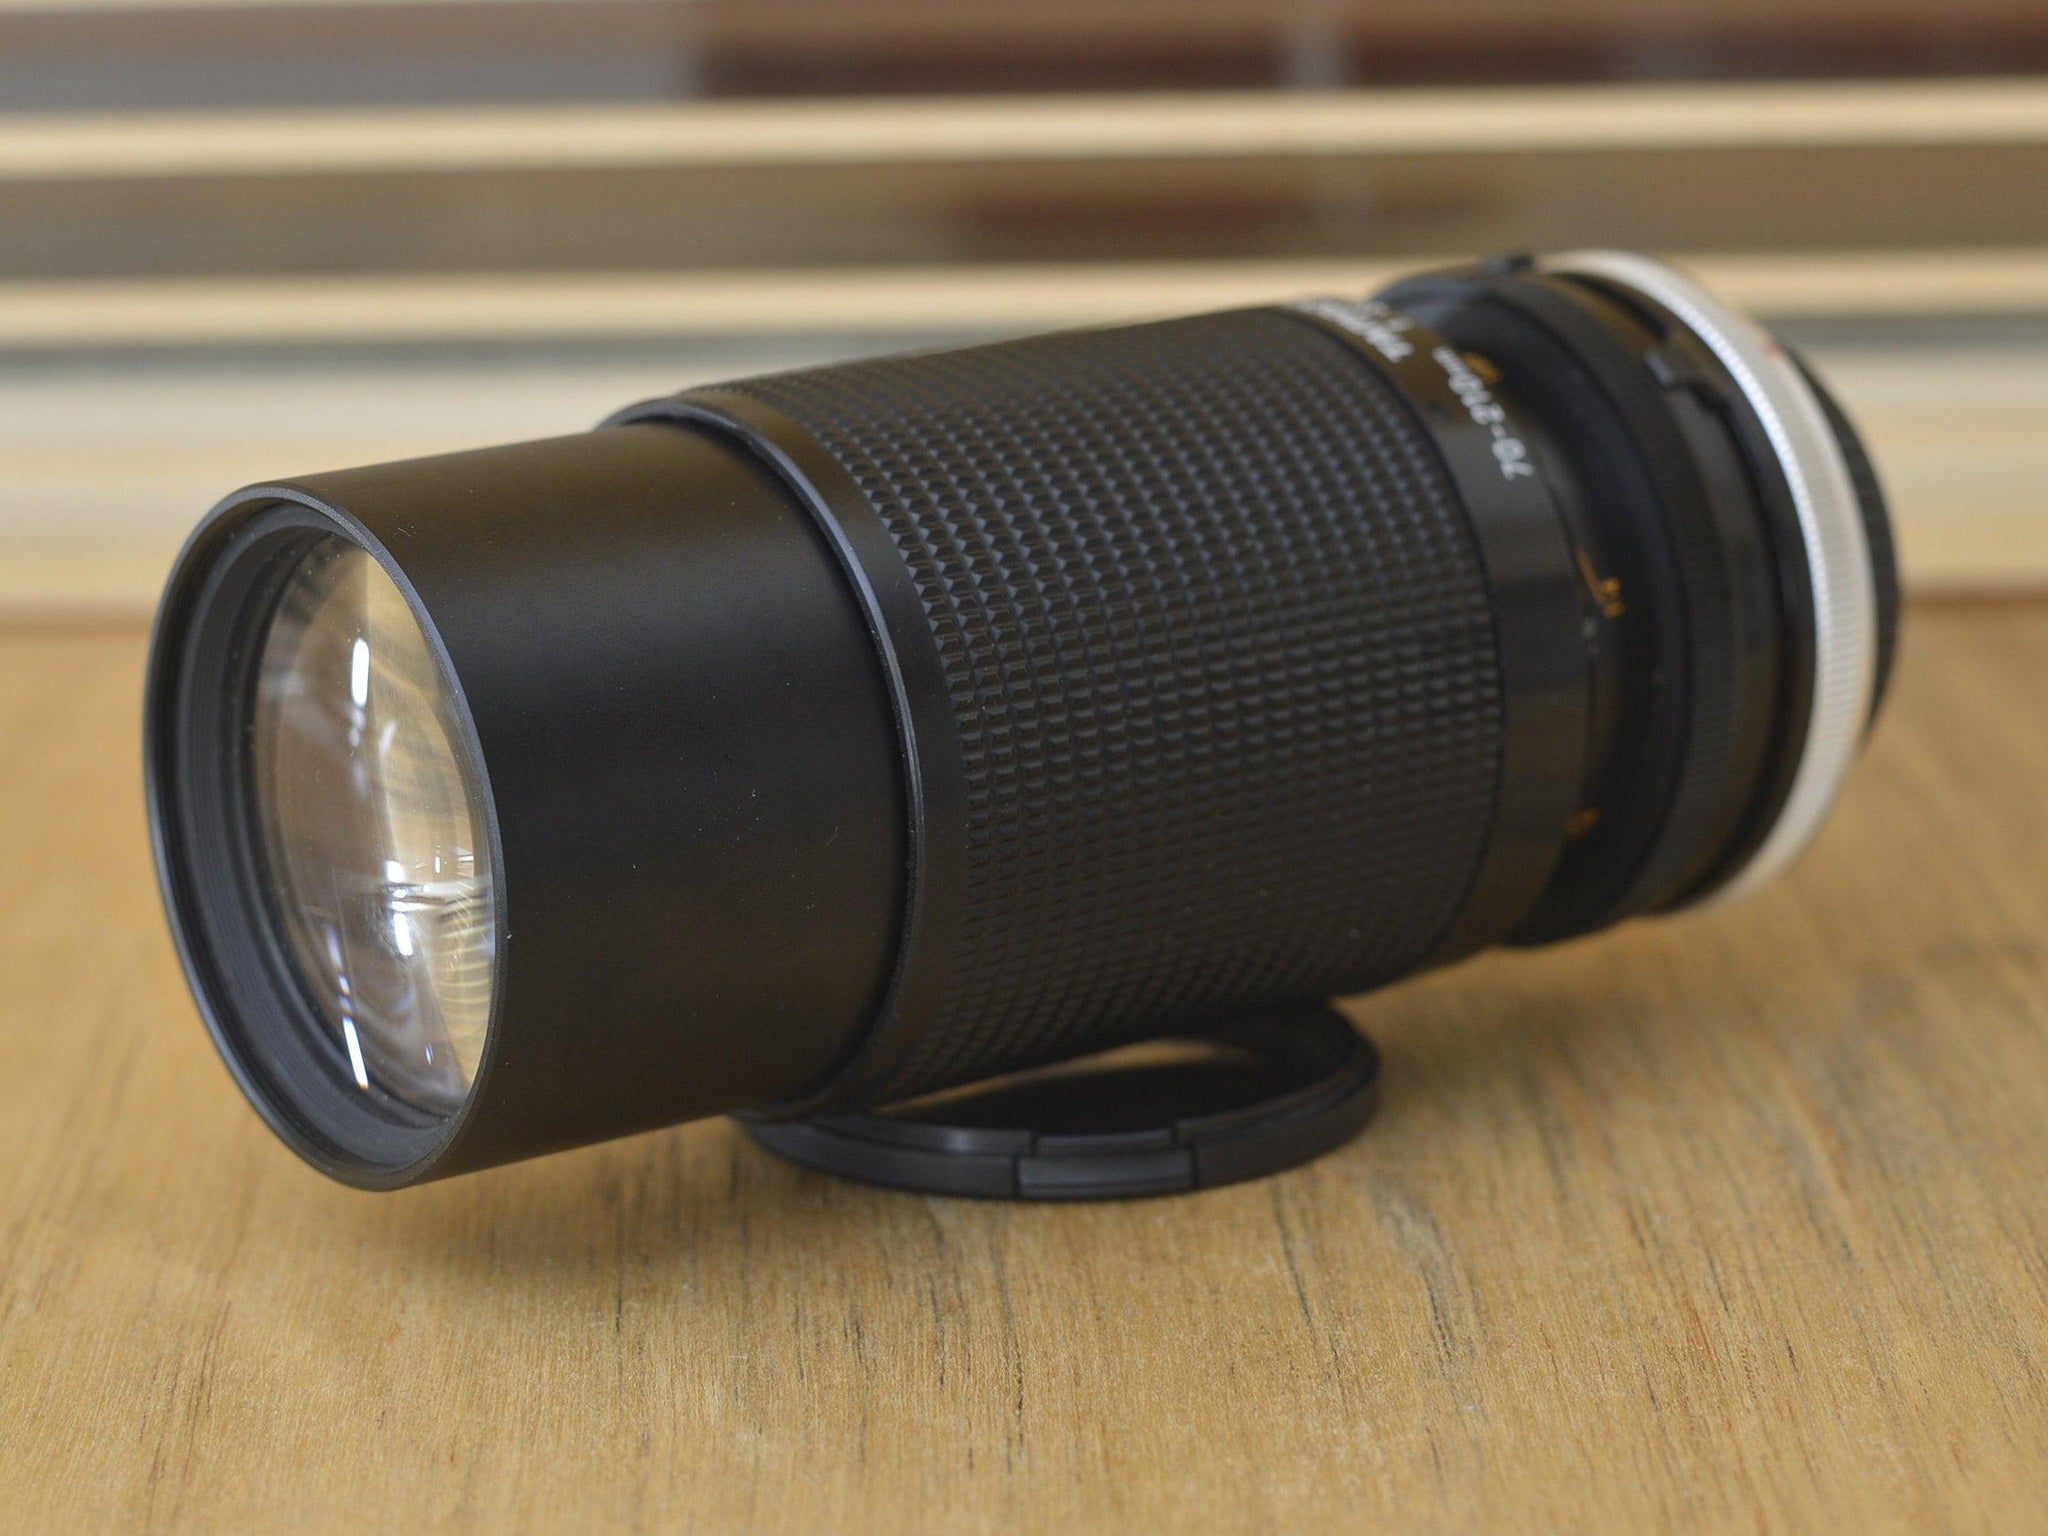 Tamron FD 70-210mm 1:3.8-4 zoom lens. A lovely condition lens with great range. A wonderful addition to your vintage set up. - RewindCameras quality vintage cameras, fully tested and serviced